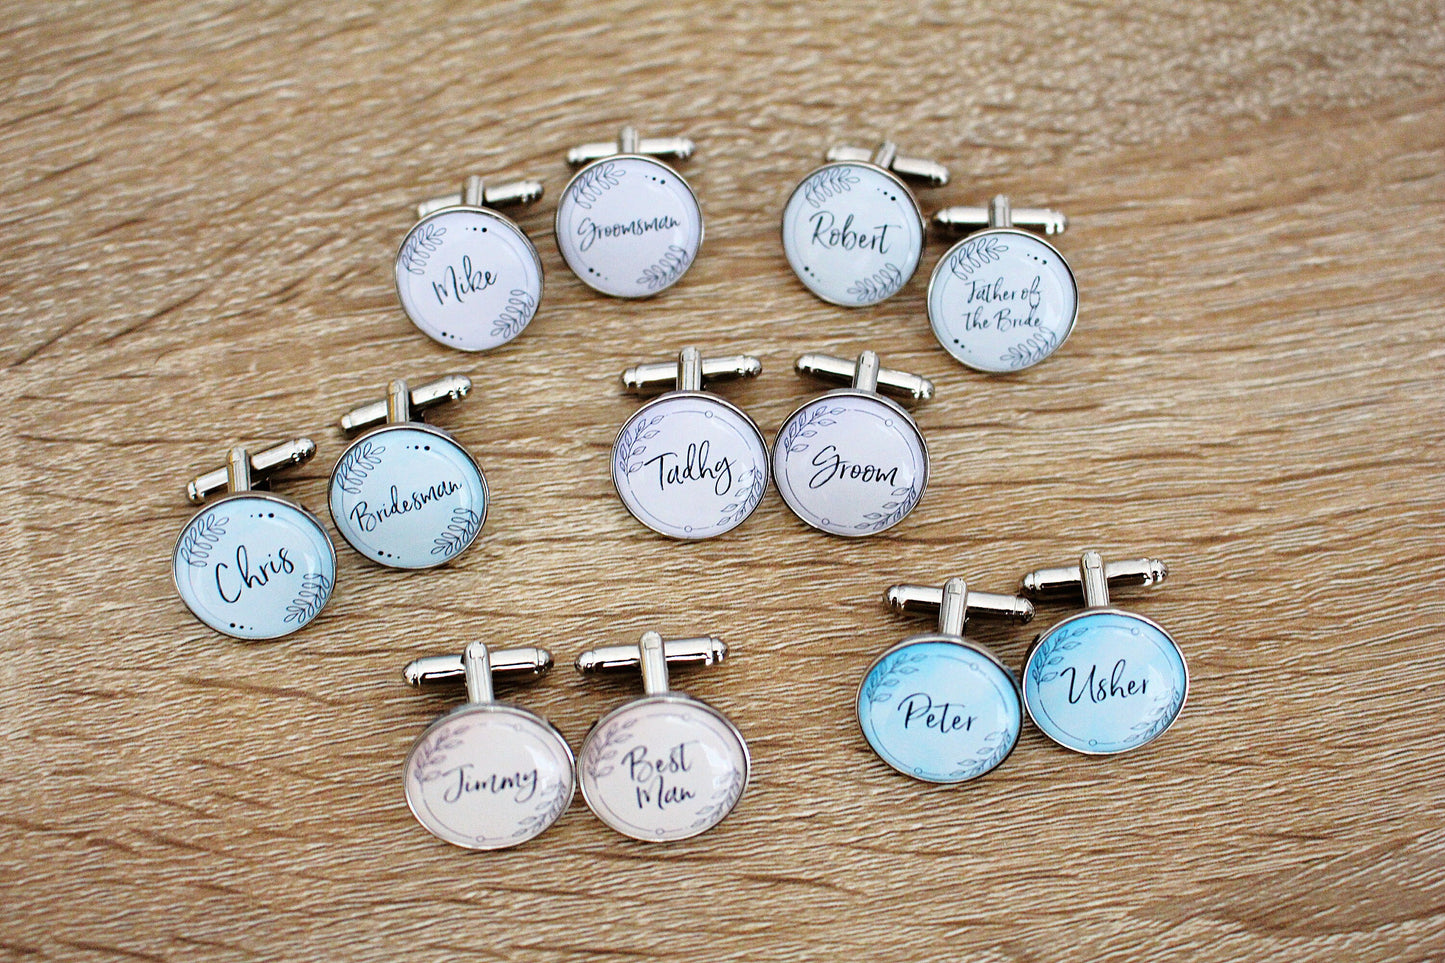 Groomsmen Personalised Cufflinks. Pastels Floral Colourful. Match colour with Groom suit. Best Man Father of the Bride. Calligraphy Names.